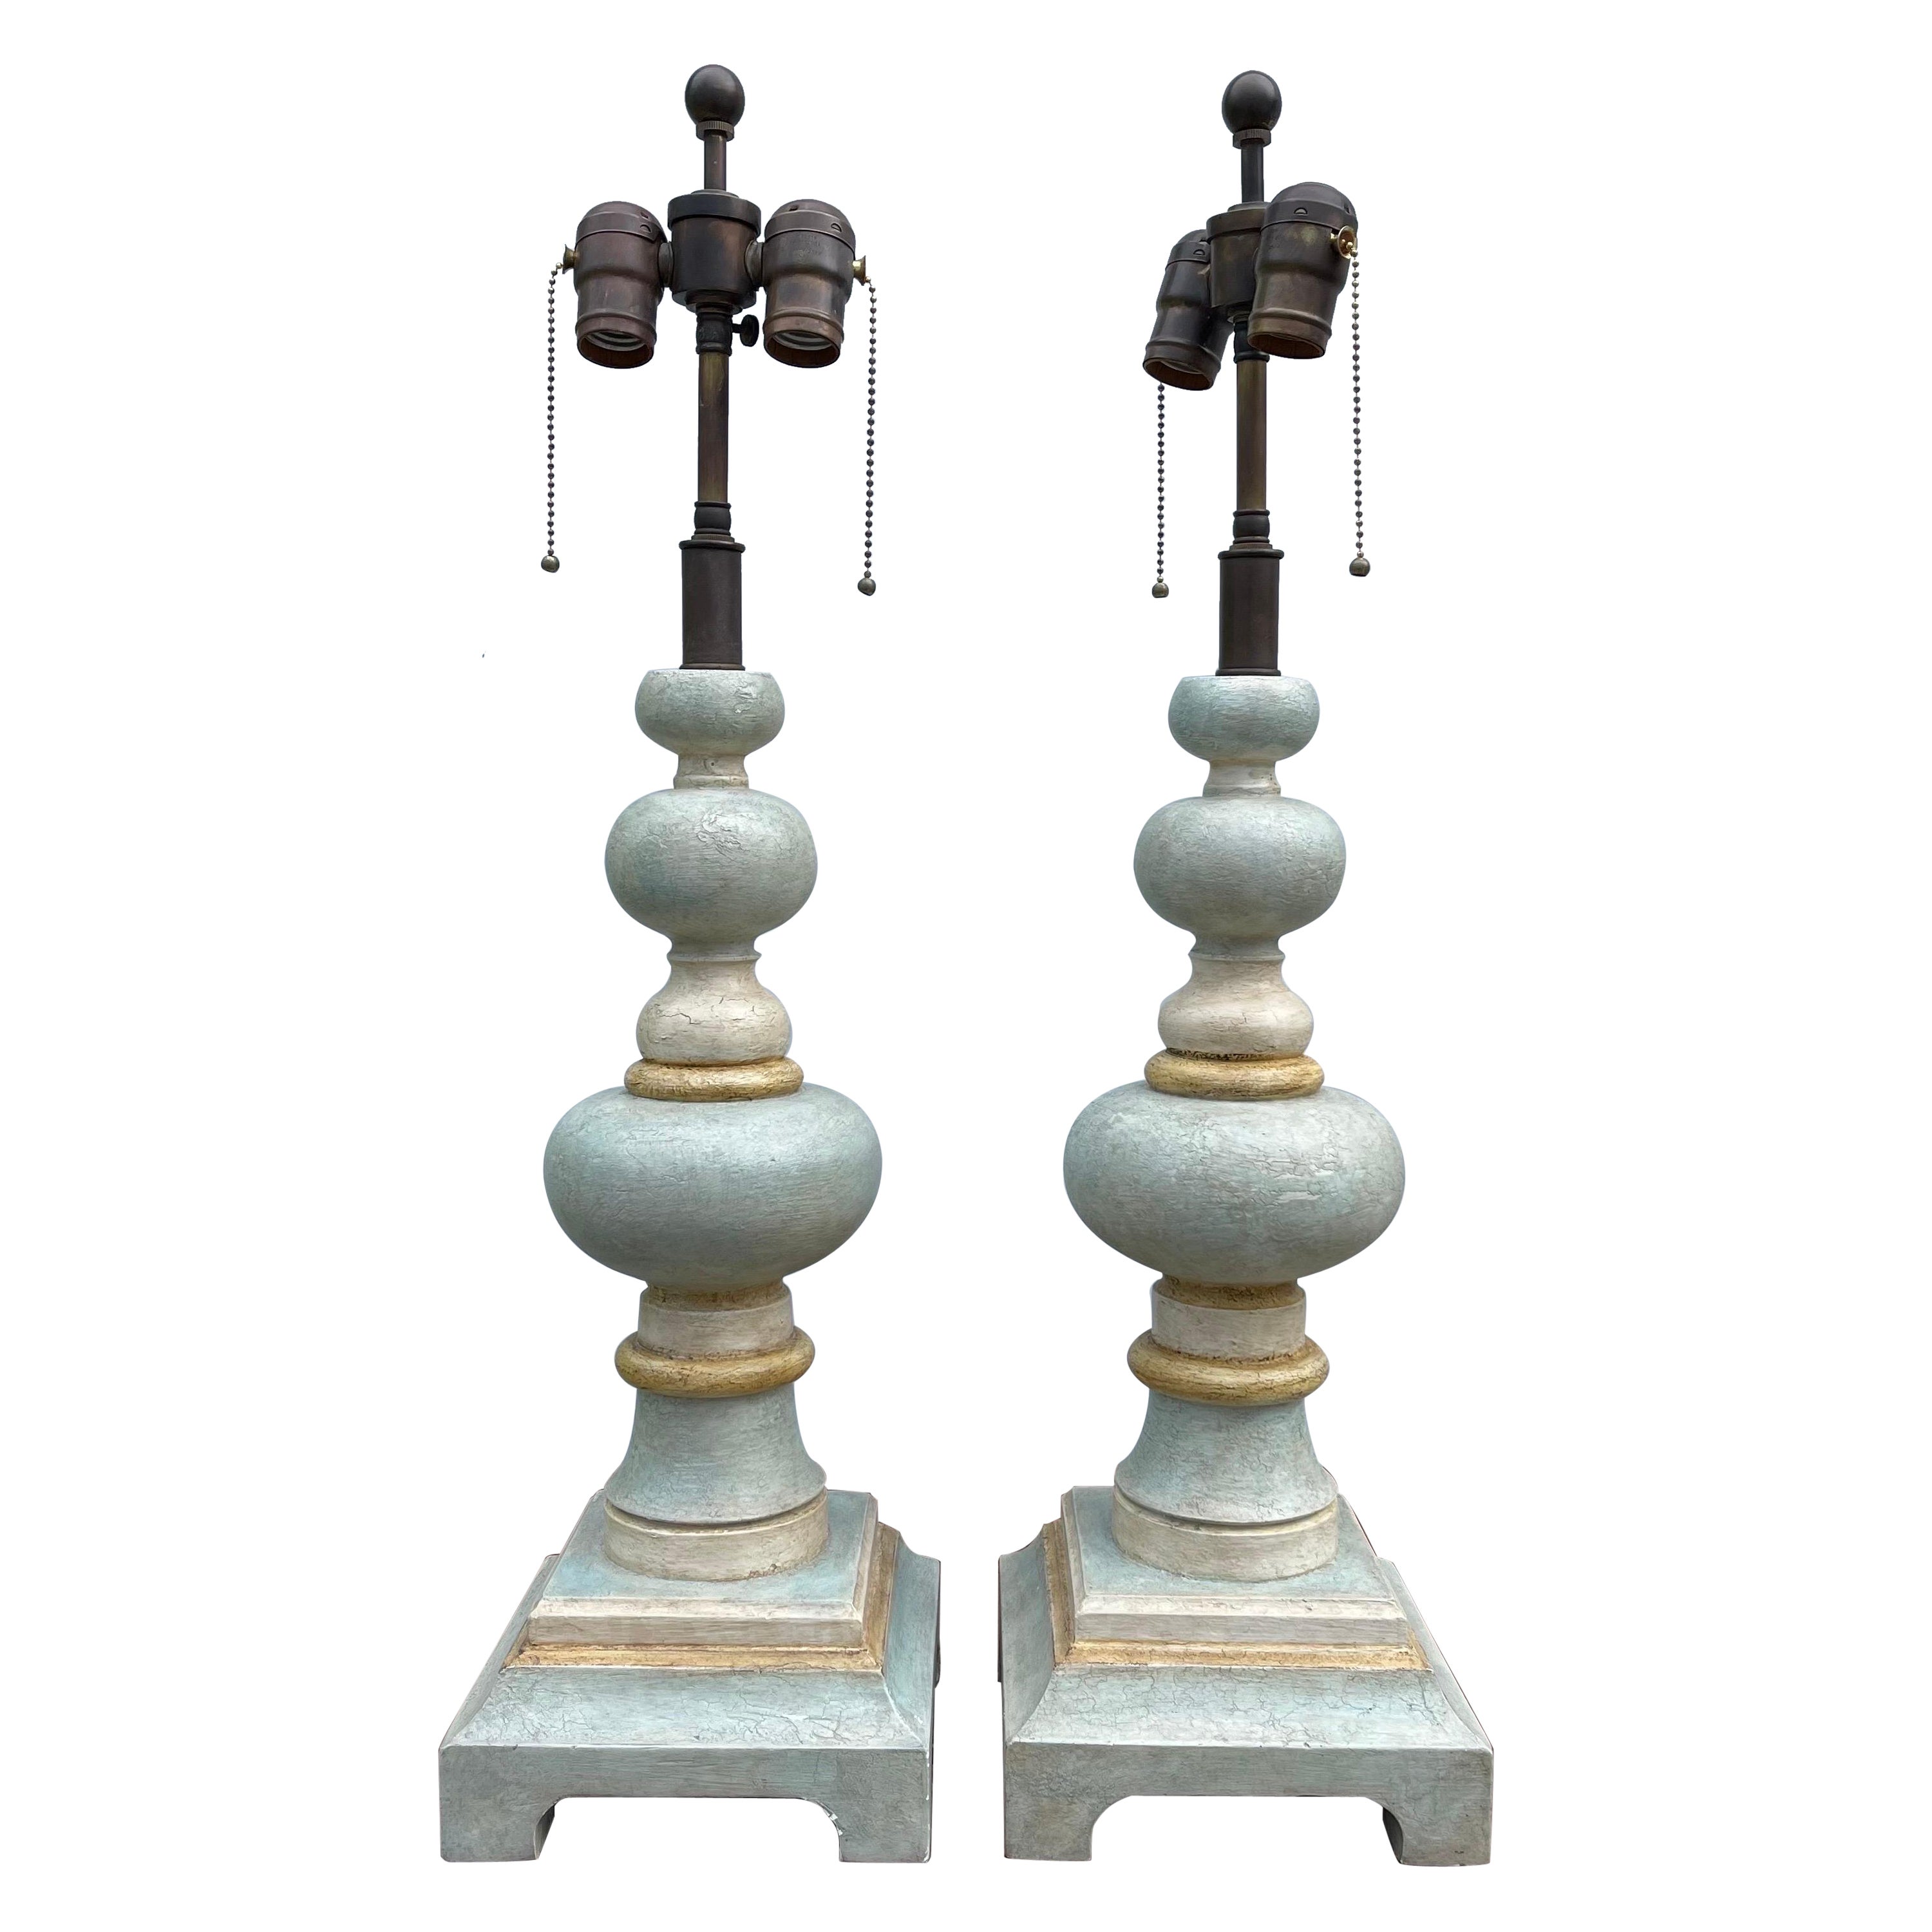 Hollywood Regency Painted Patinated Carved Wood Bobbin Tables Lamps, a Pair For Sale